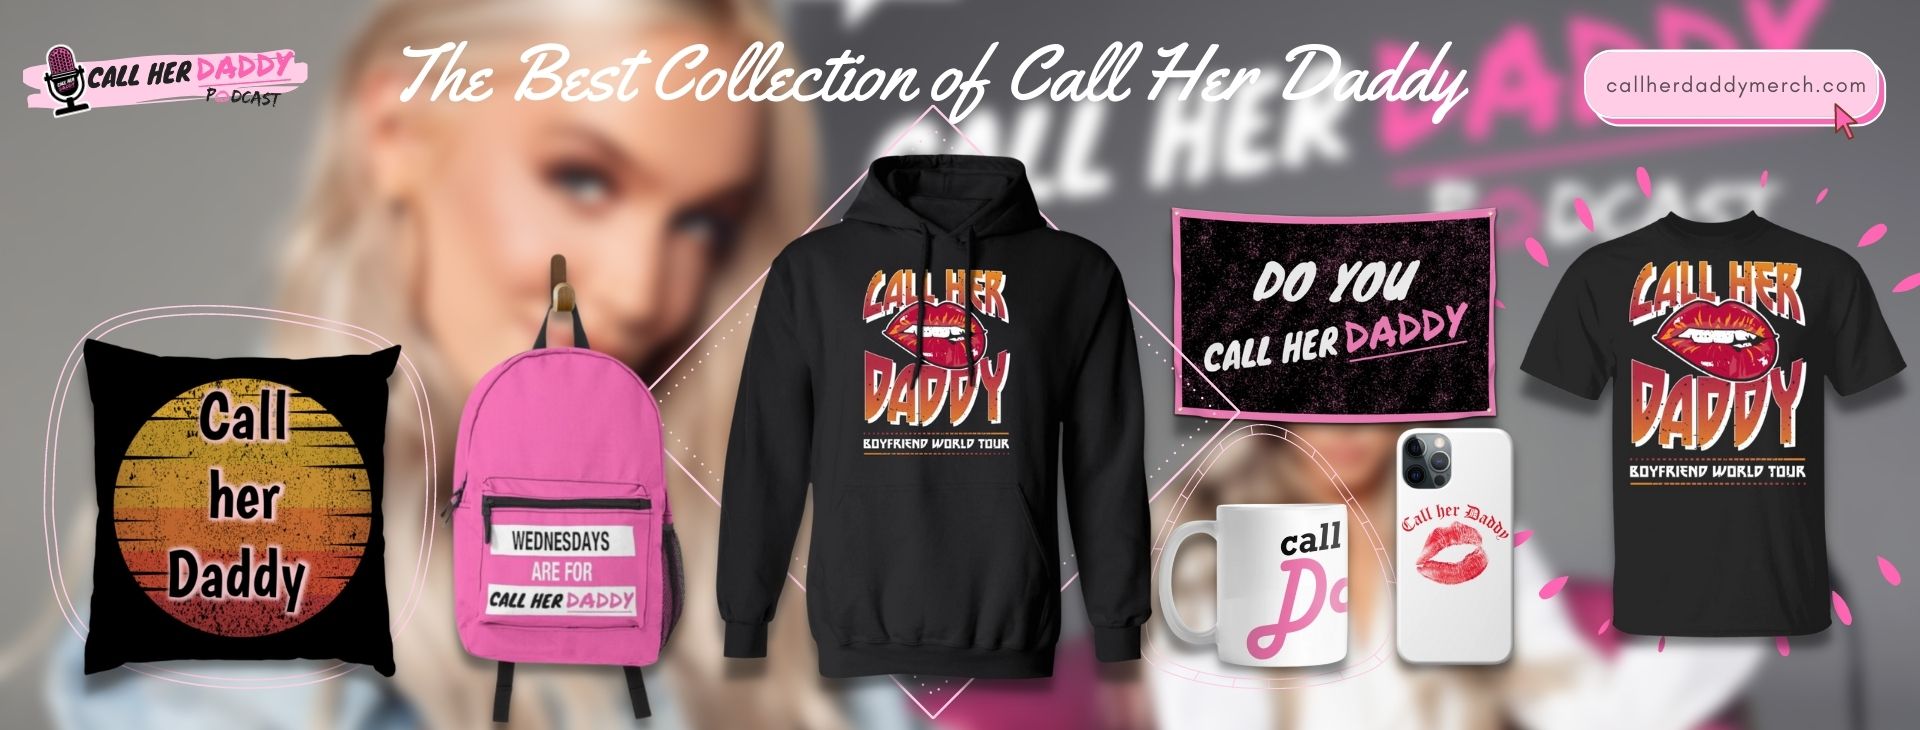 Call Her Daddy Store Banner - Call Her Daddy Merch